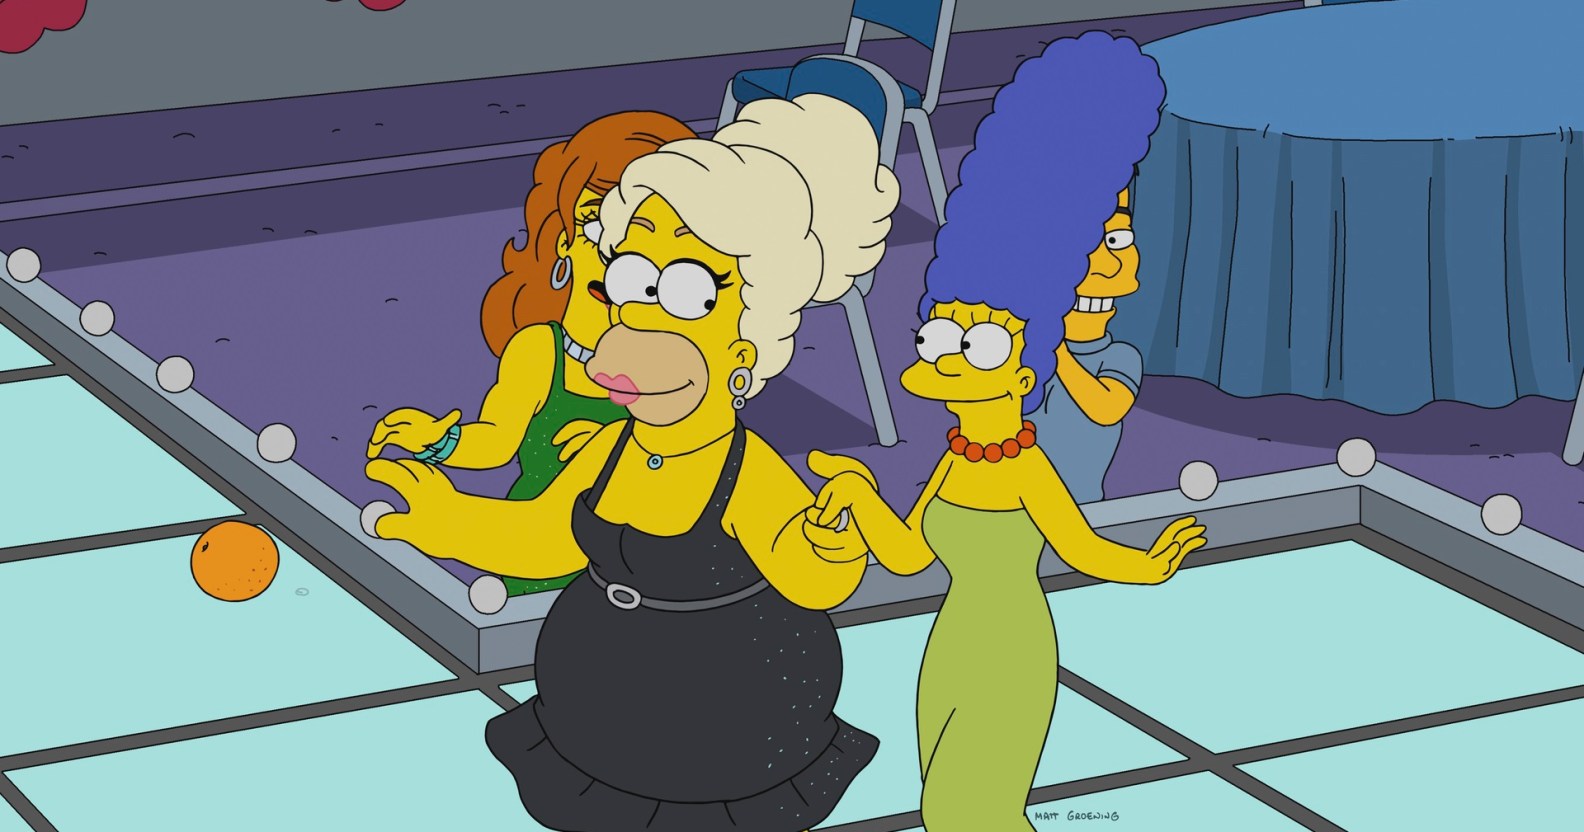 Homer Simpson dresses as a drag queen in a new episode of The Simpsons